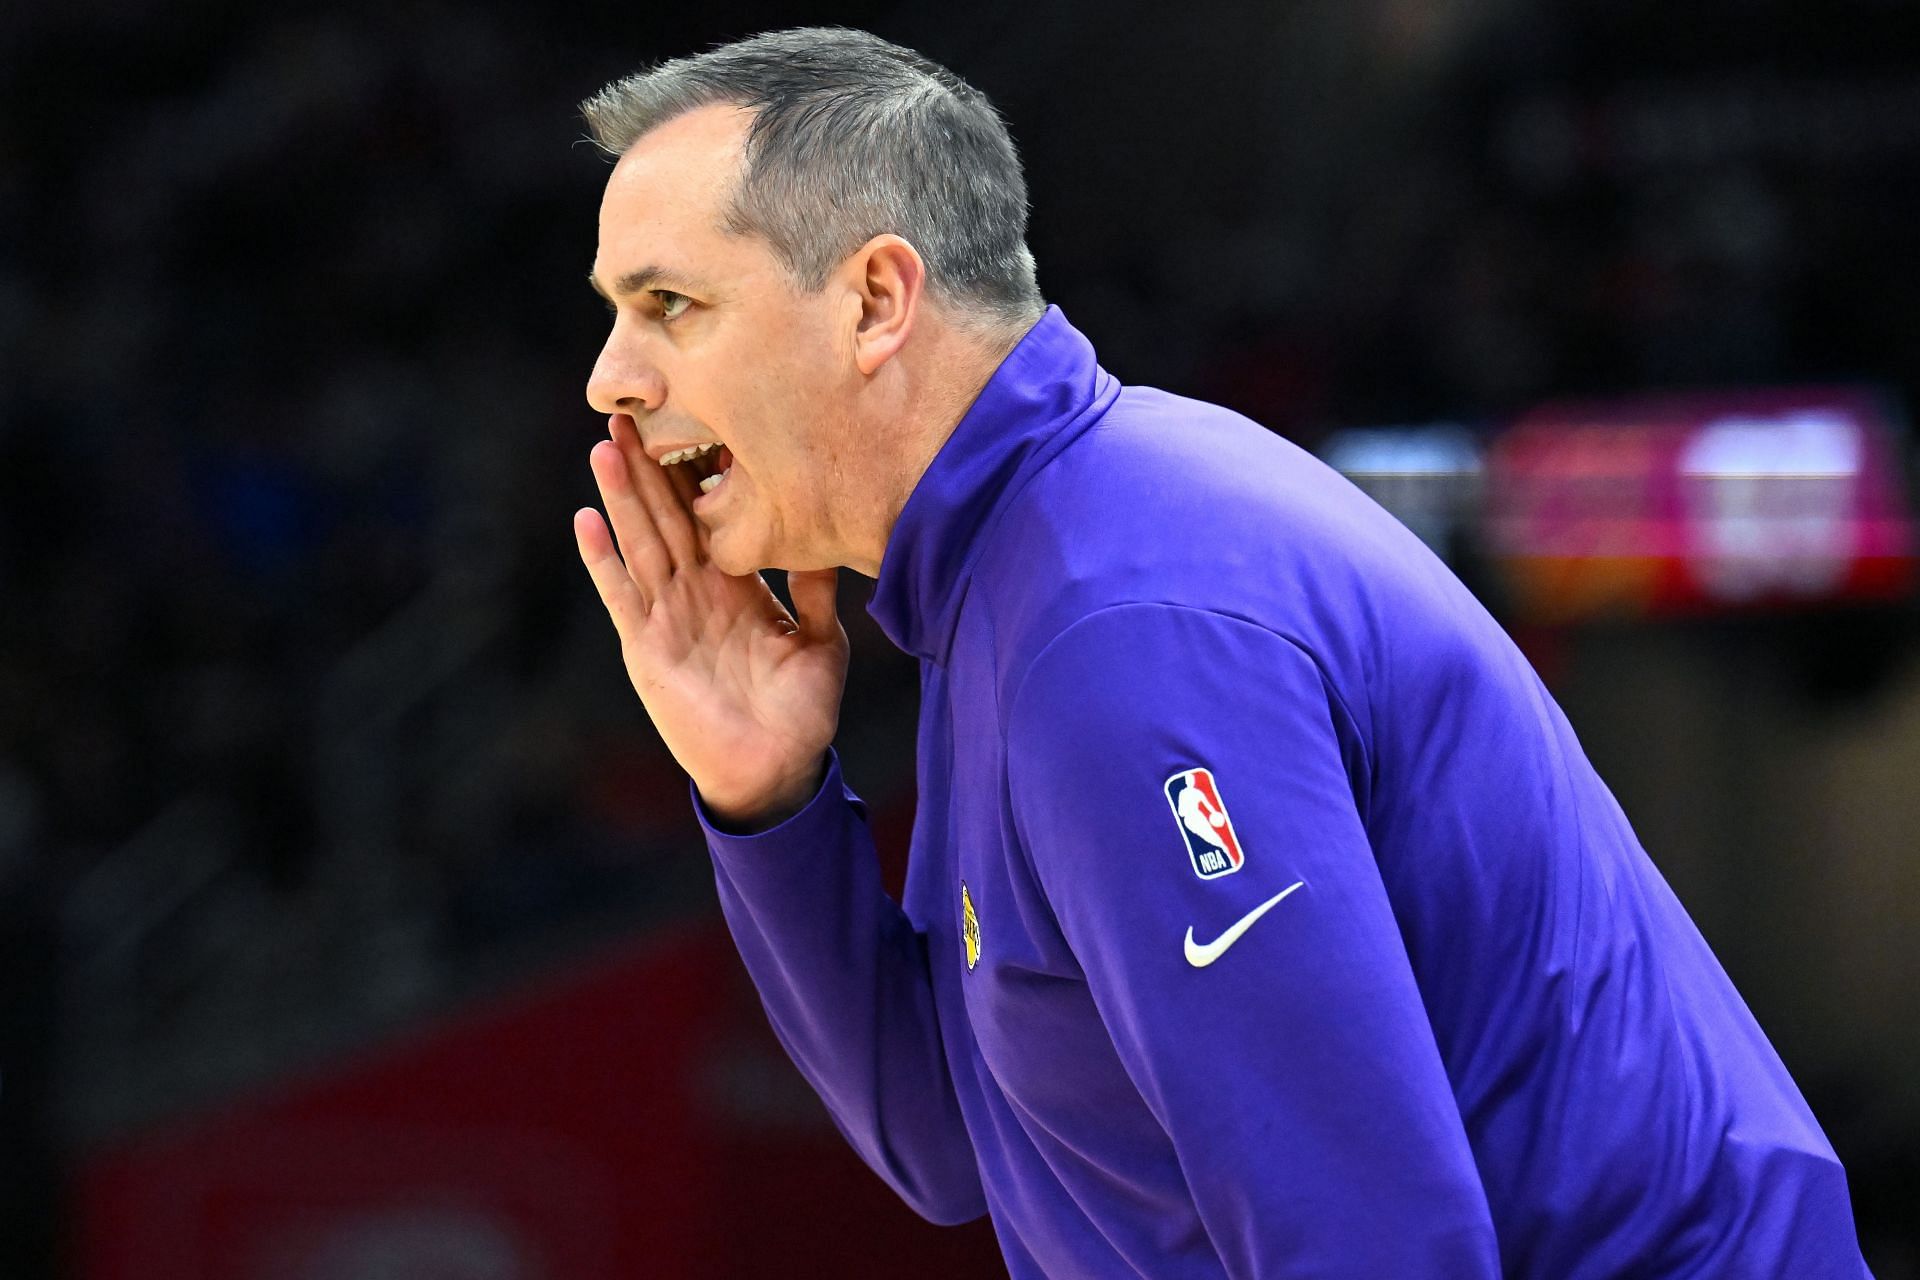 LA Lakers will look for a new coach after firing Frank Vogel